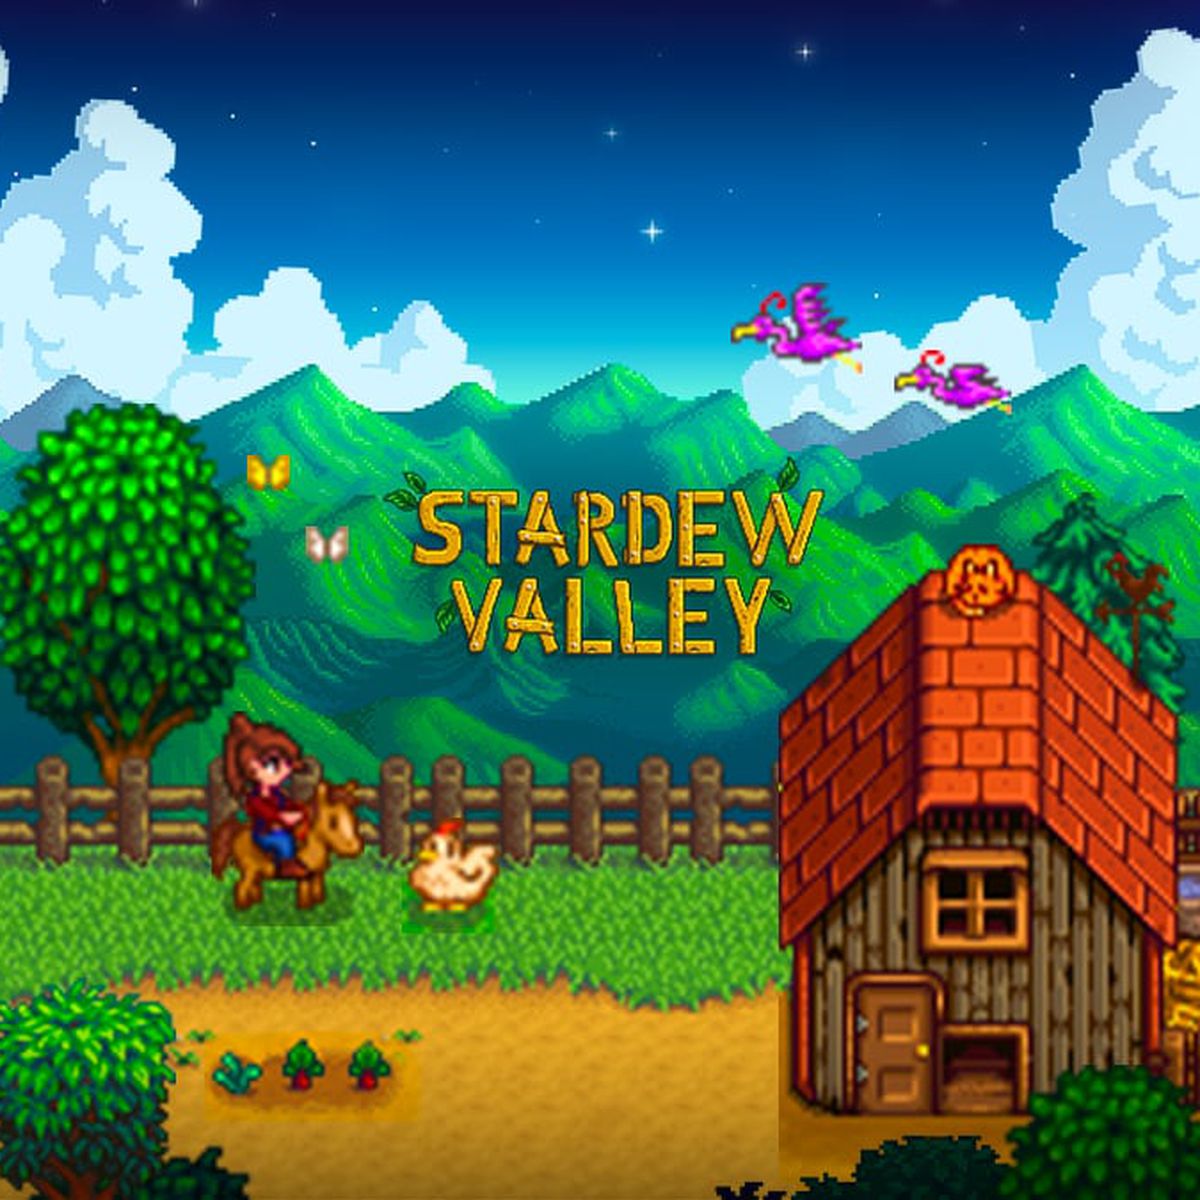 Apple bags Stardew Valley in coup for Apple Arcade